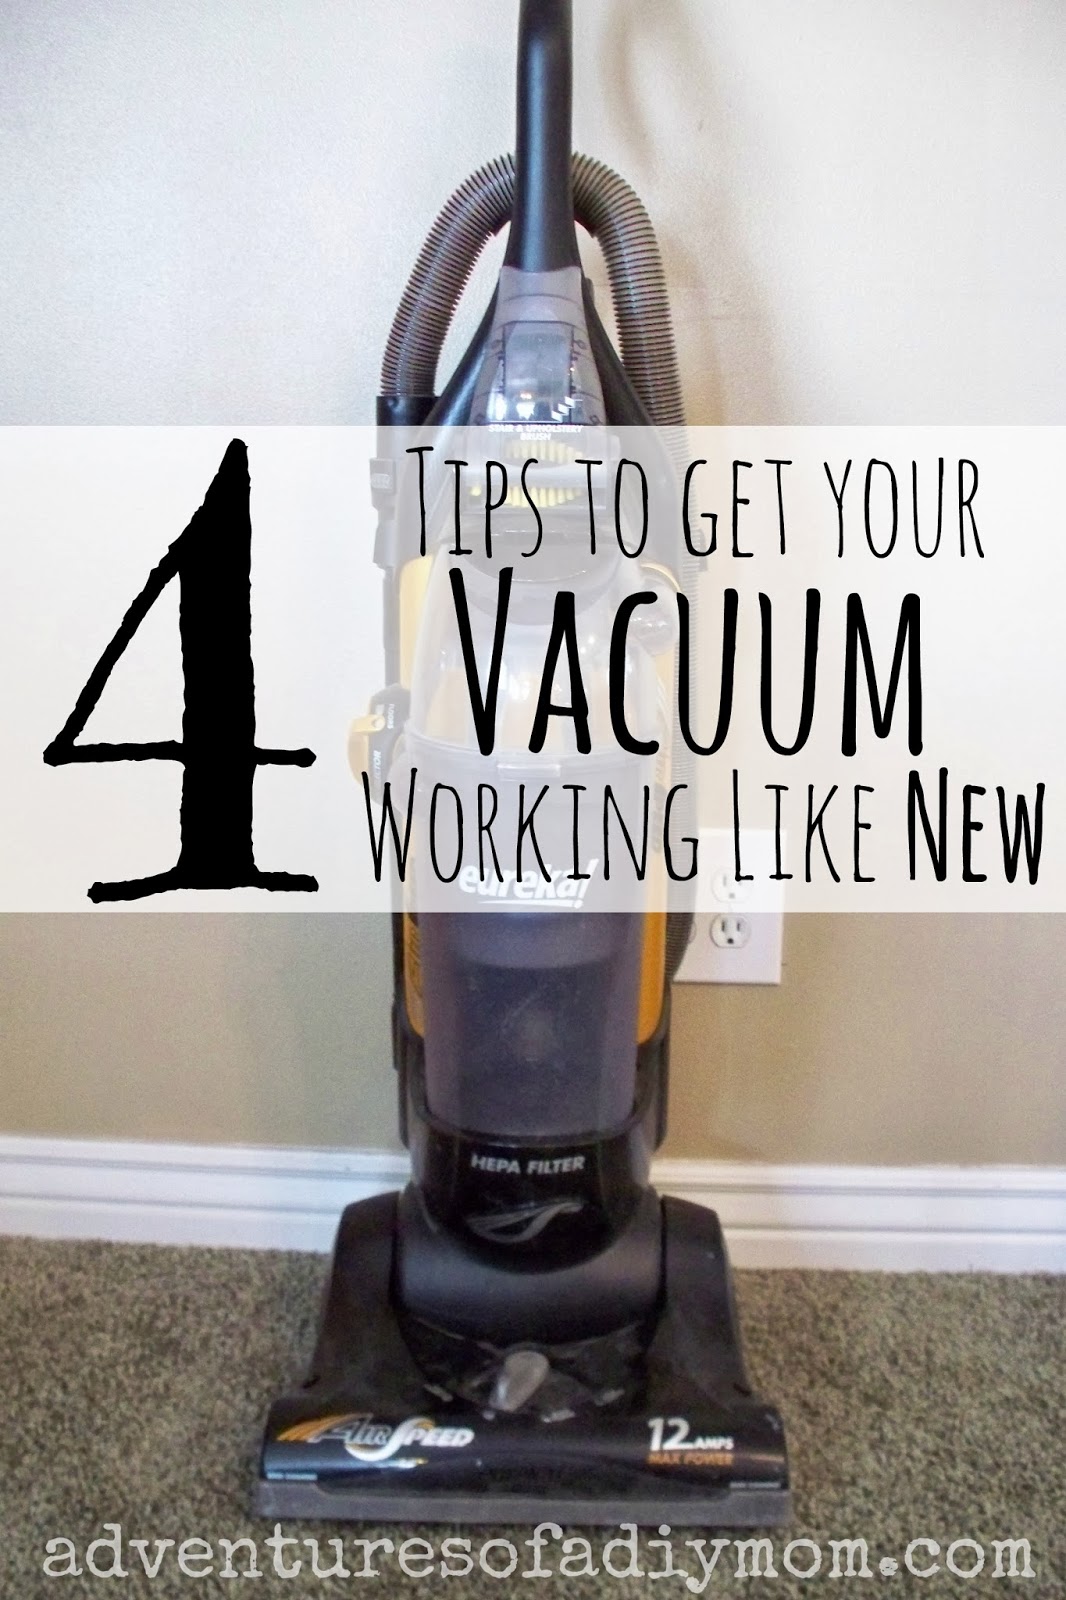 How to Fix your Vacuum - 4 Tips to get it working like new